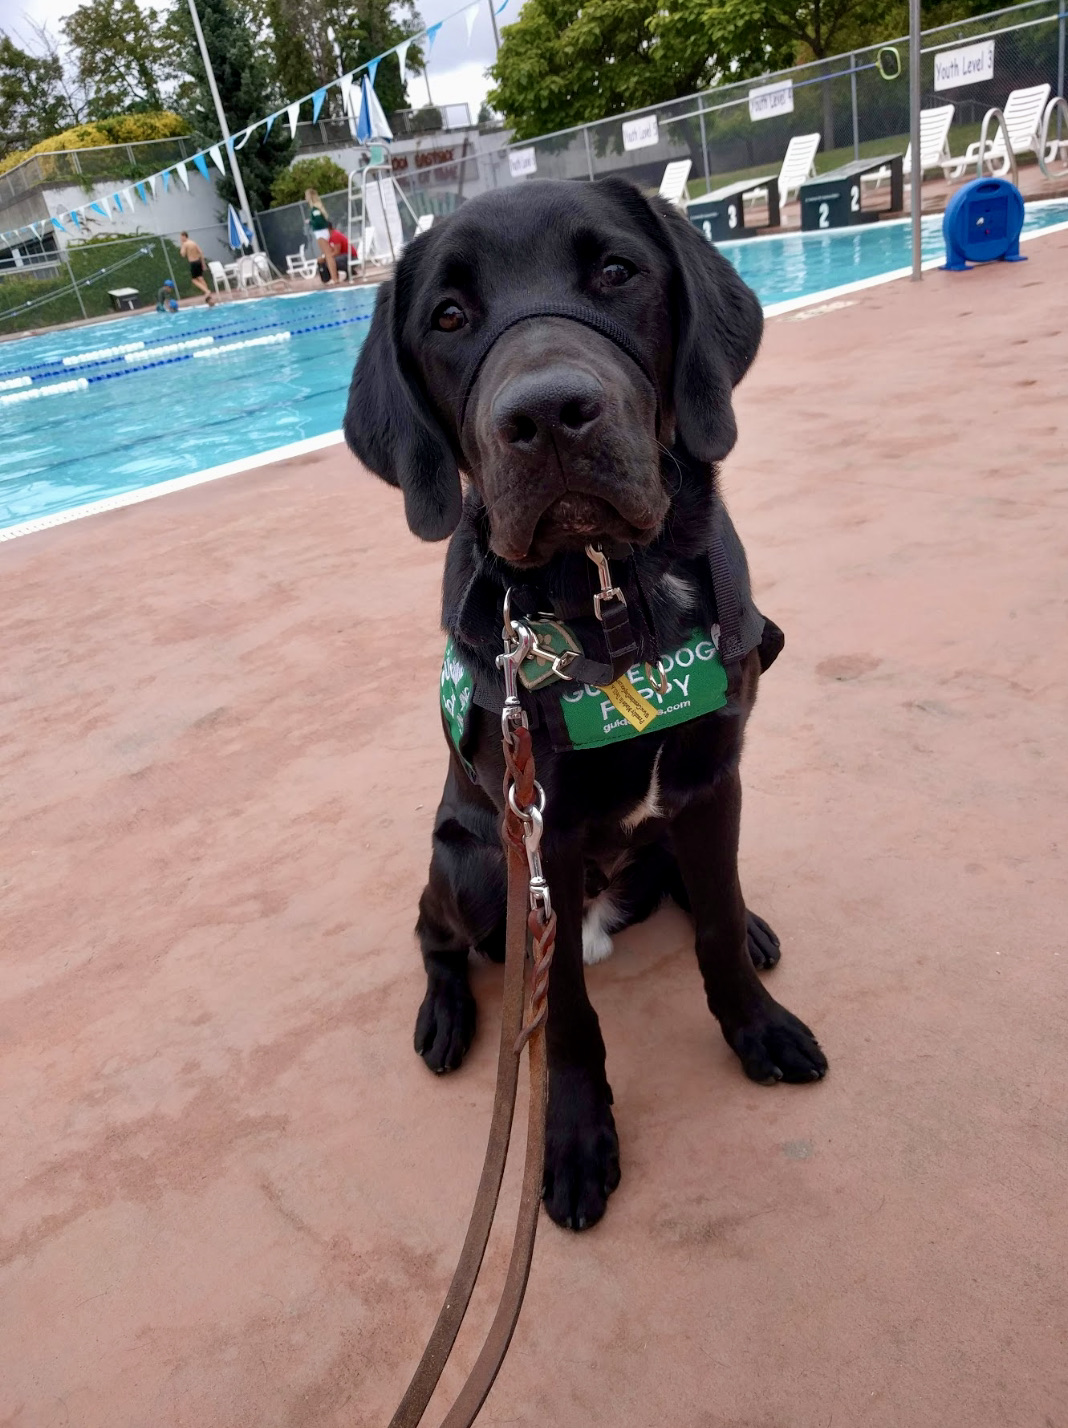 GDB Puppy in Training, Radcliff with his green puppy jacket, in front of a pool.